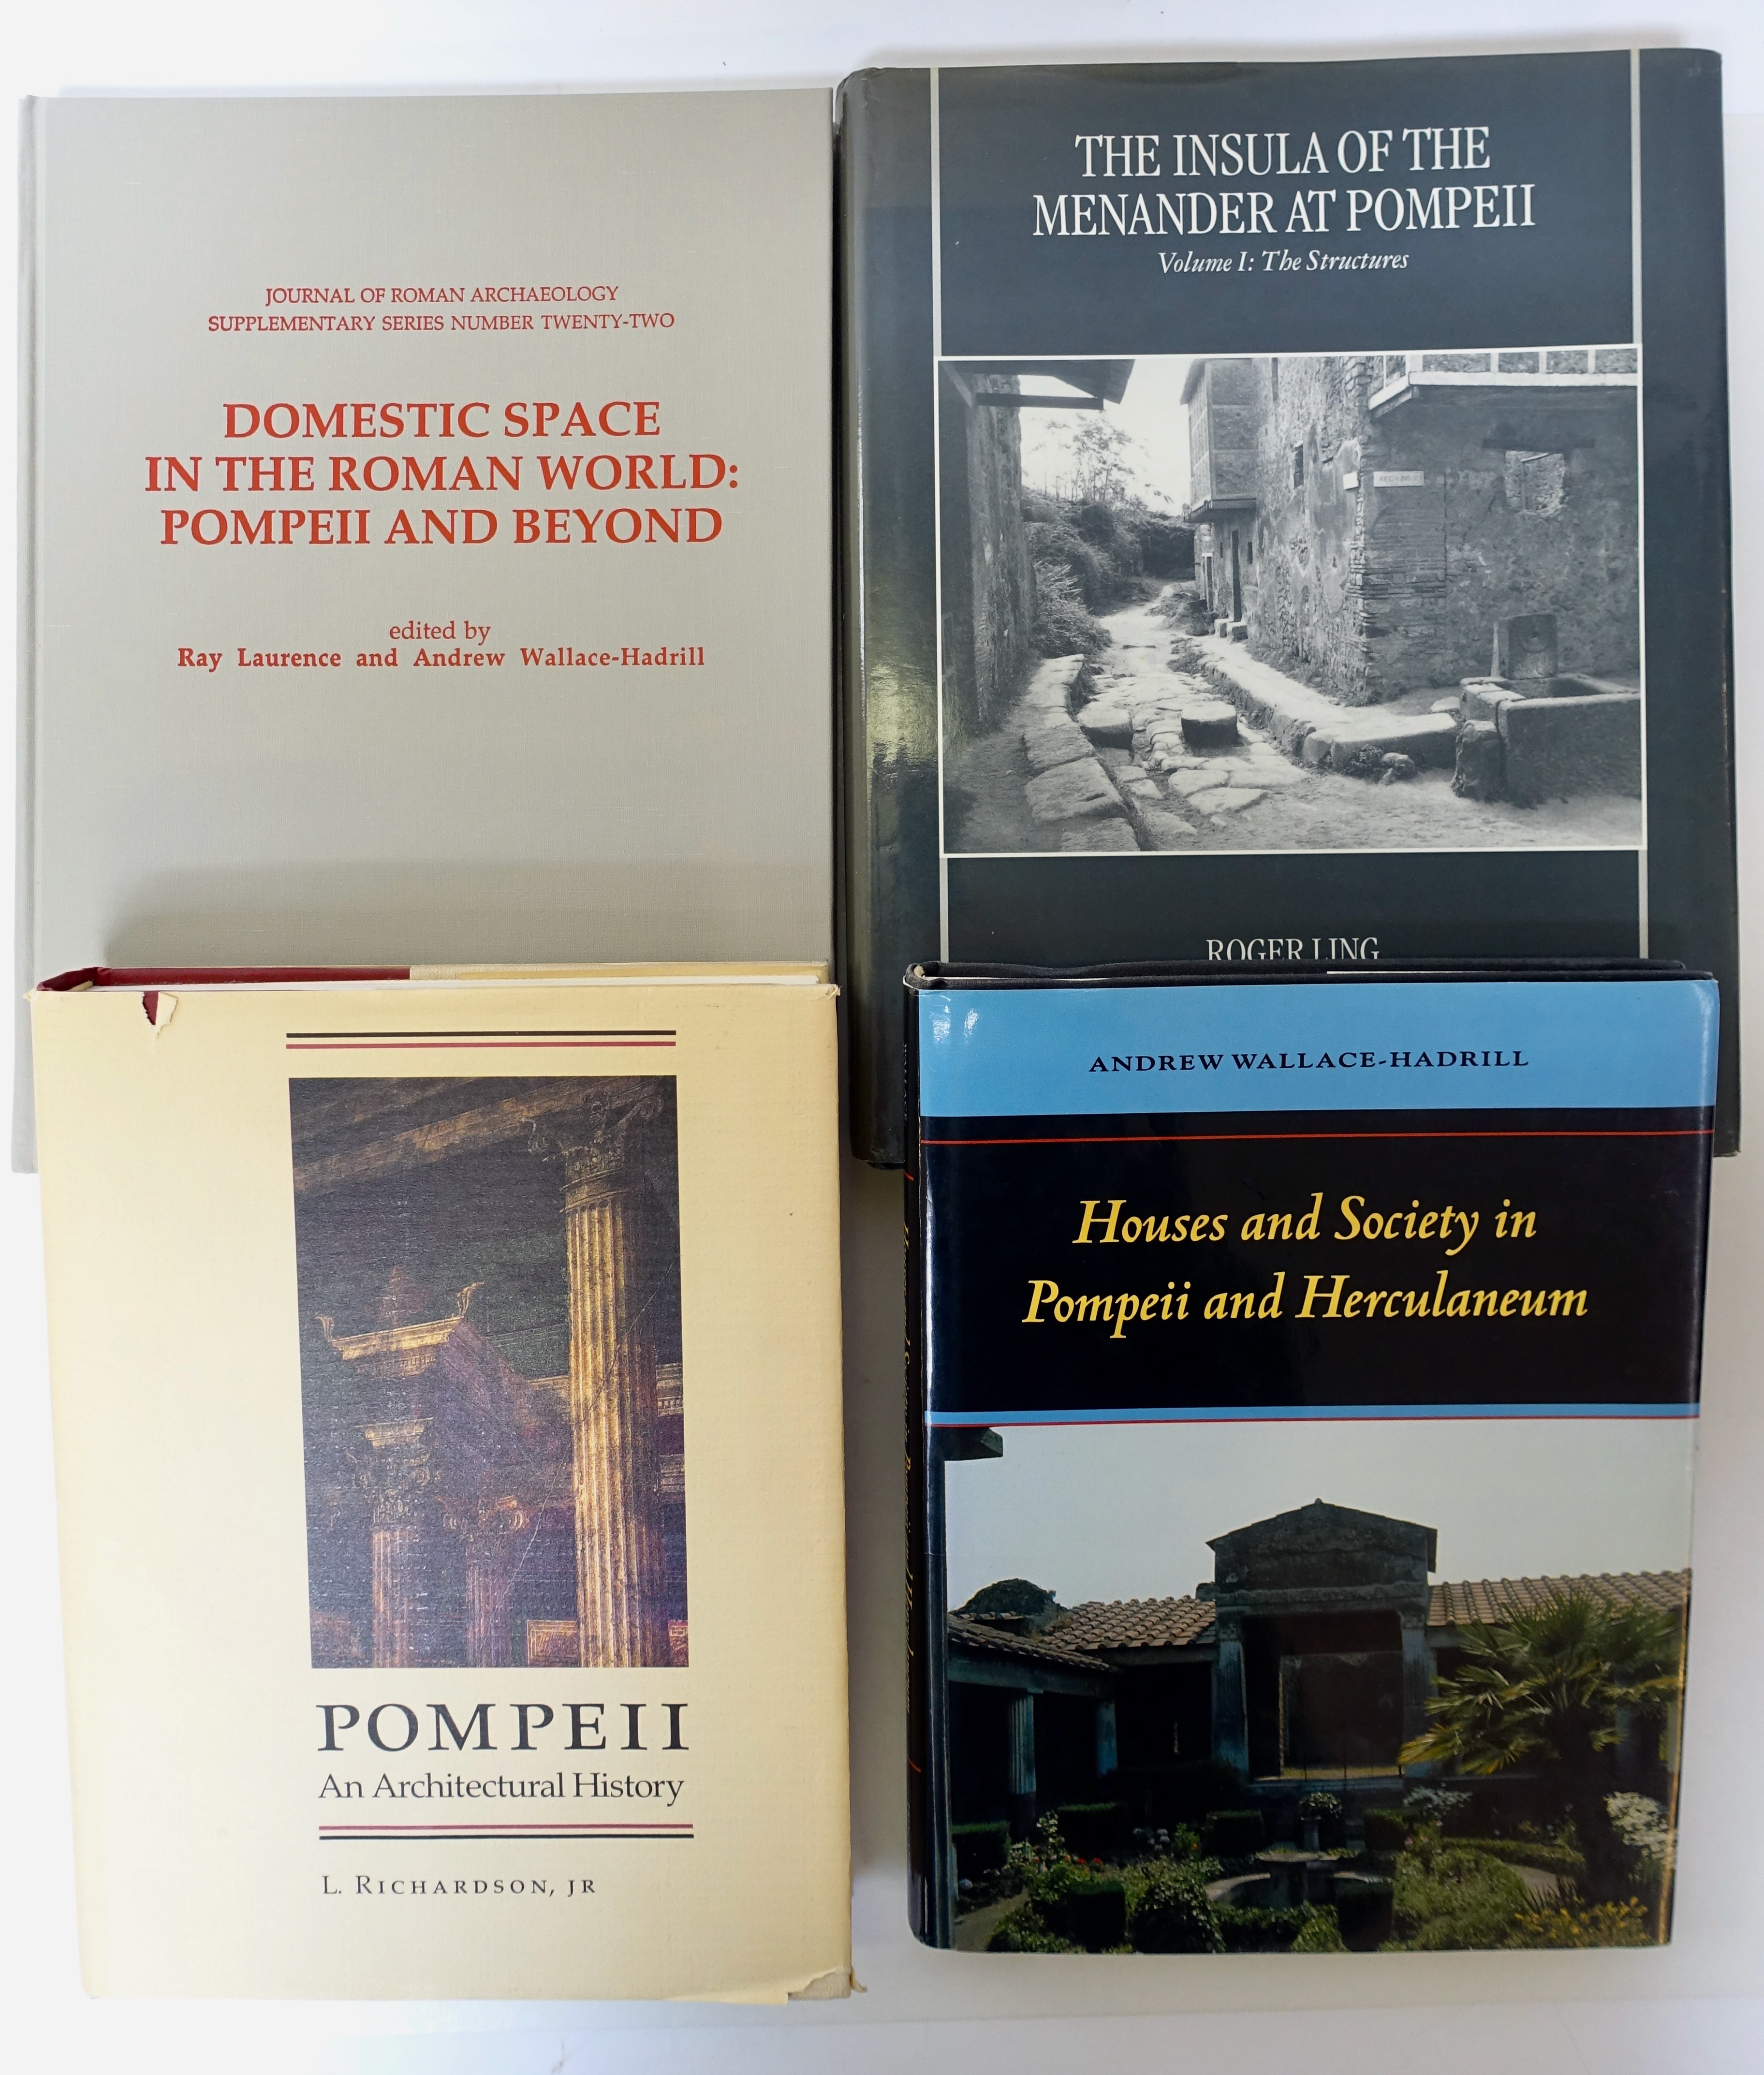 POMPEII -- LAURENCE, R. & A.WALLACE-HADRILL, ed. Domestic Space in the Roman World